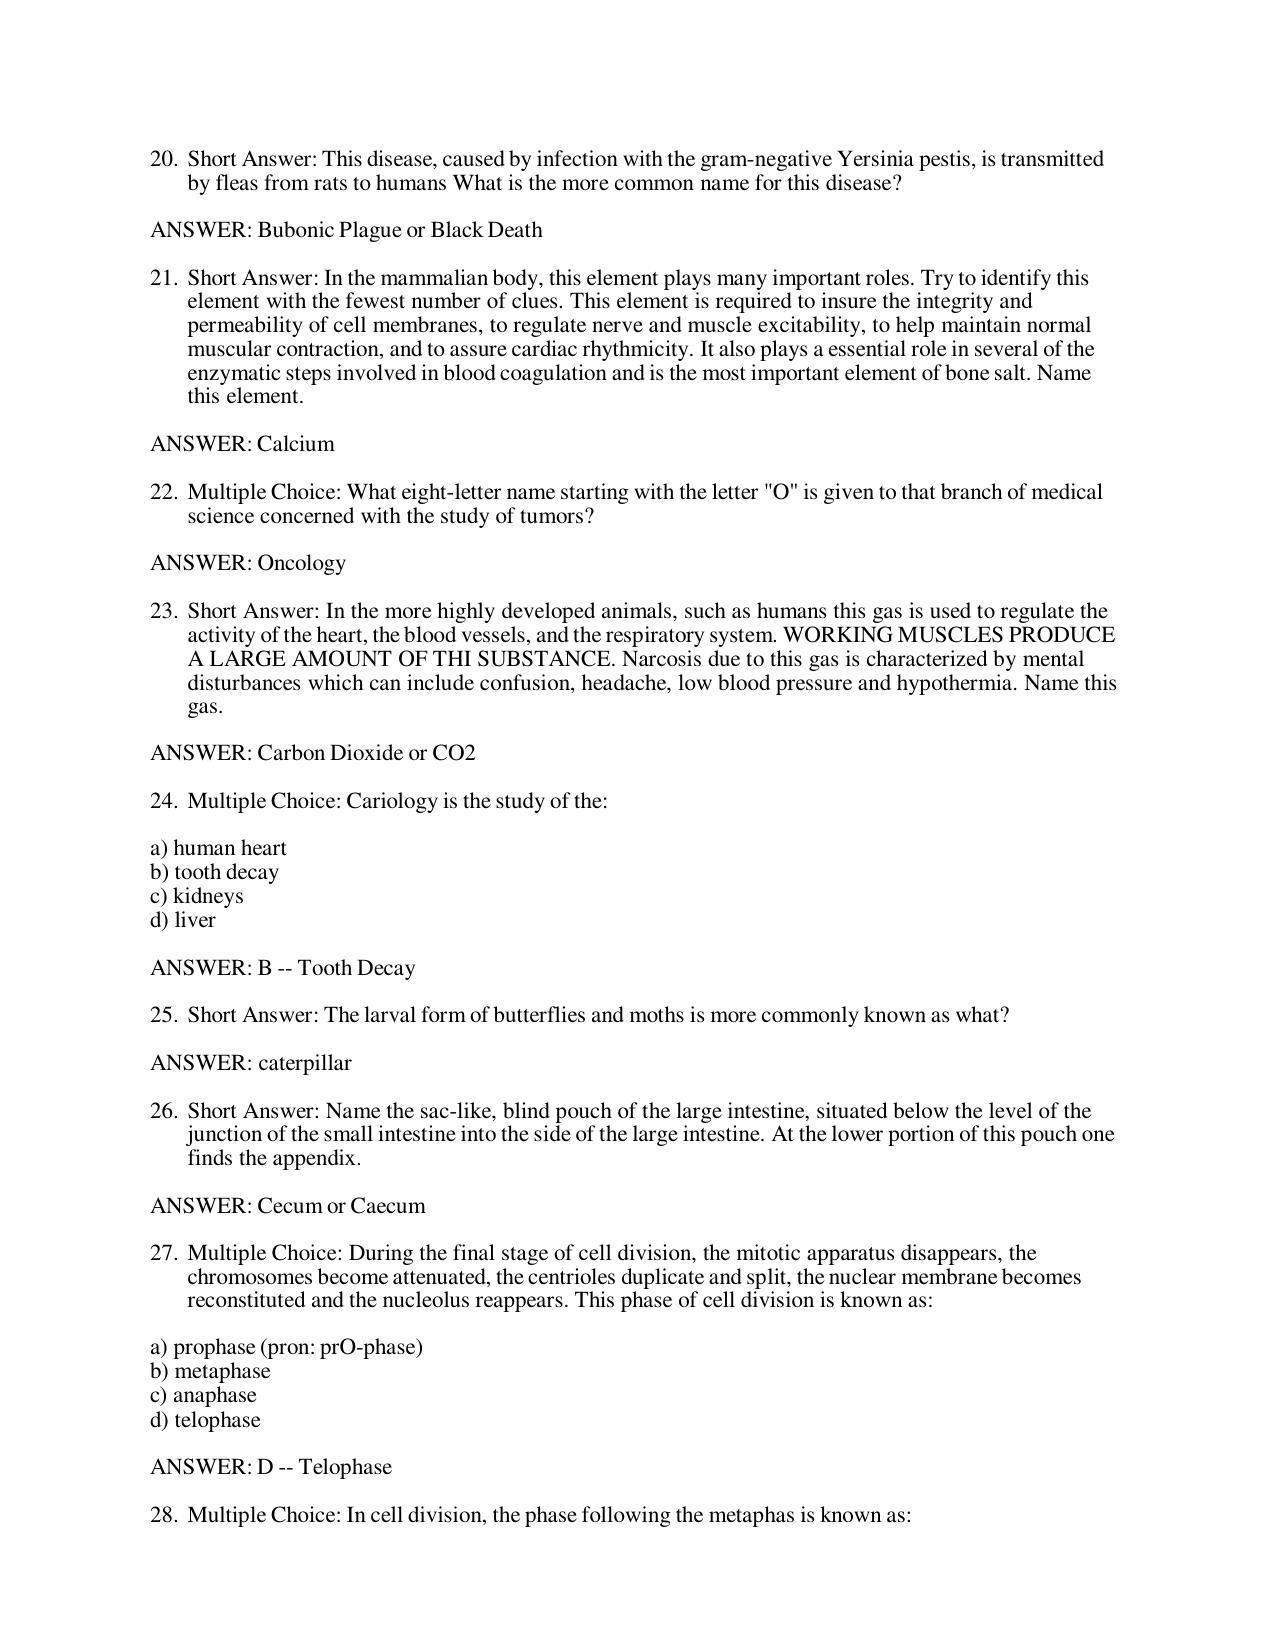 OUAT Biology Sample Paper - Page 4